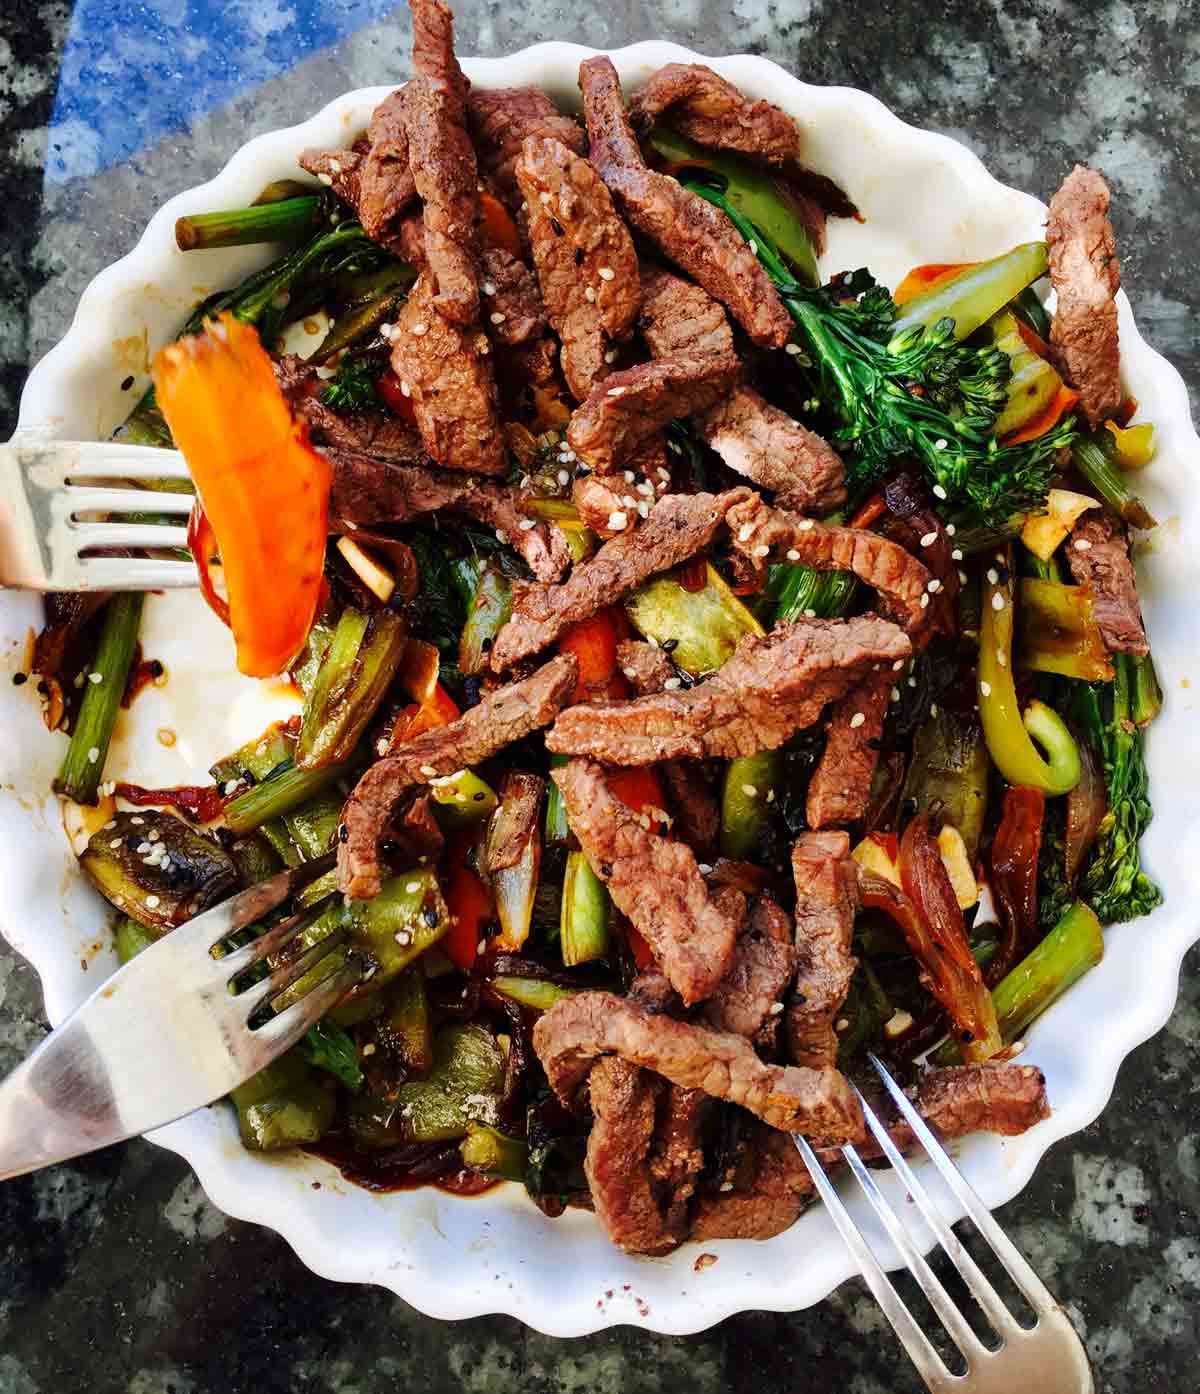 Beef hoisin stir fry with tenderstem broccoli, carrot and green pepper on a white plate